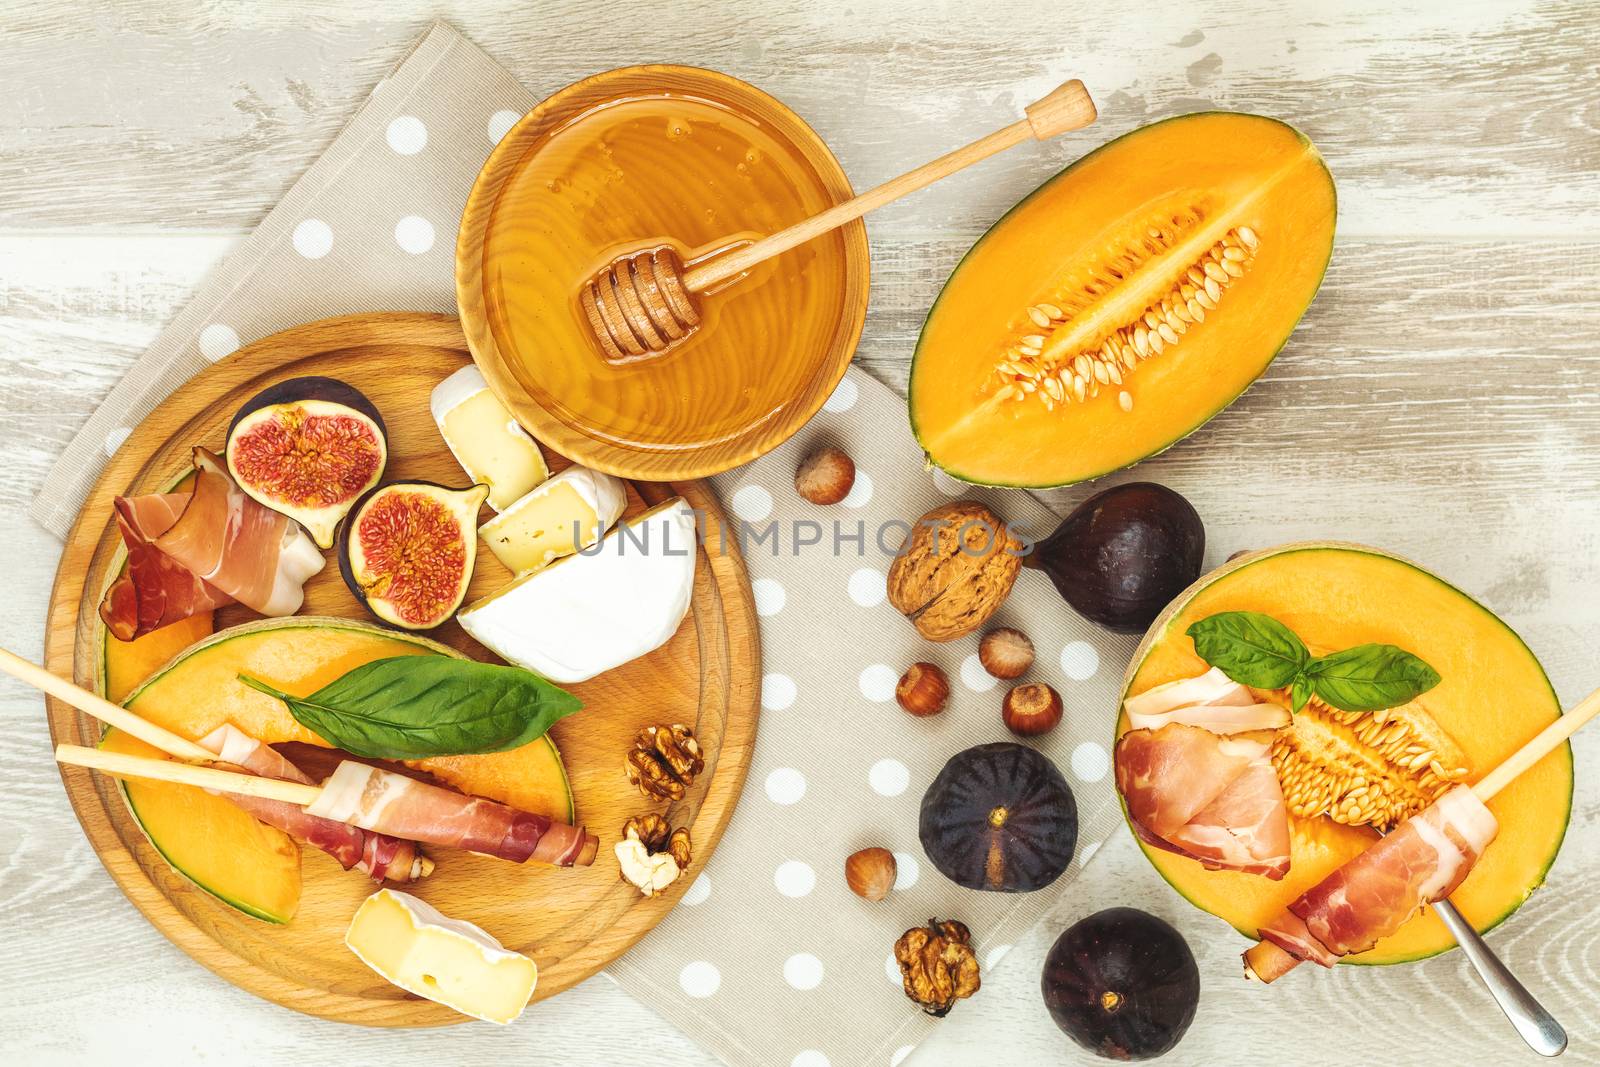 Cantaloupe melon sliced with Prosciutto and Camembert by ArtSvitlyna